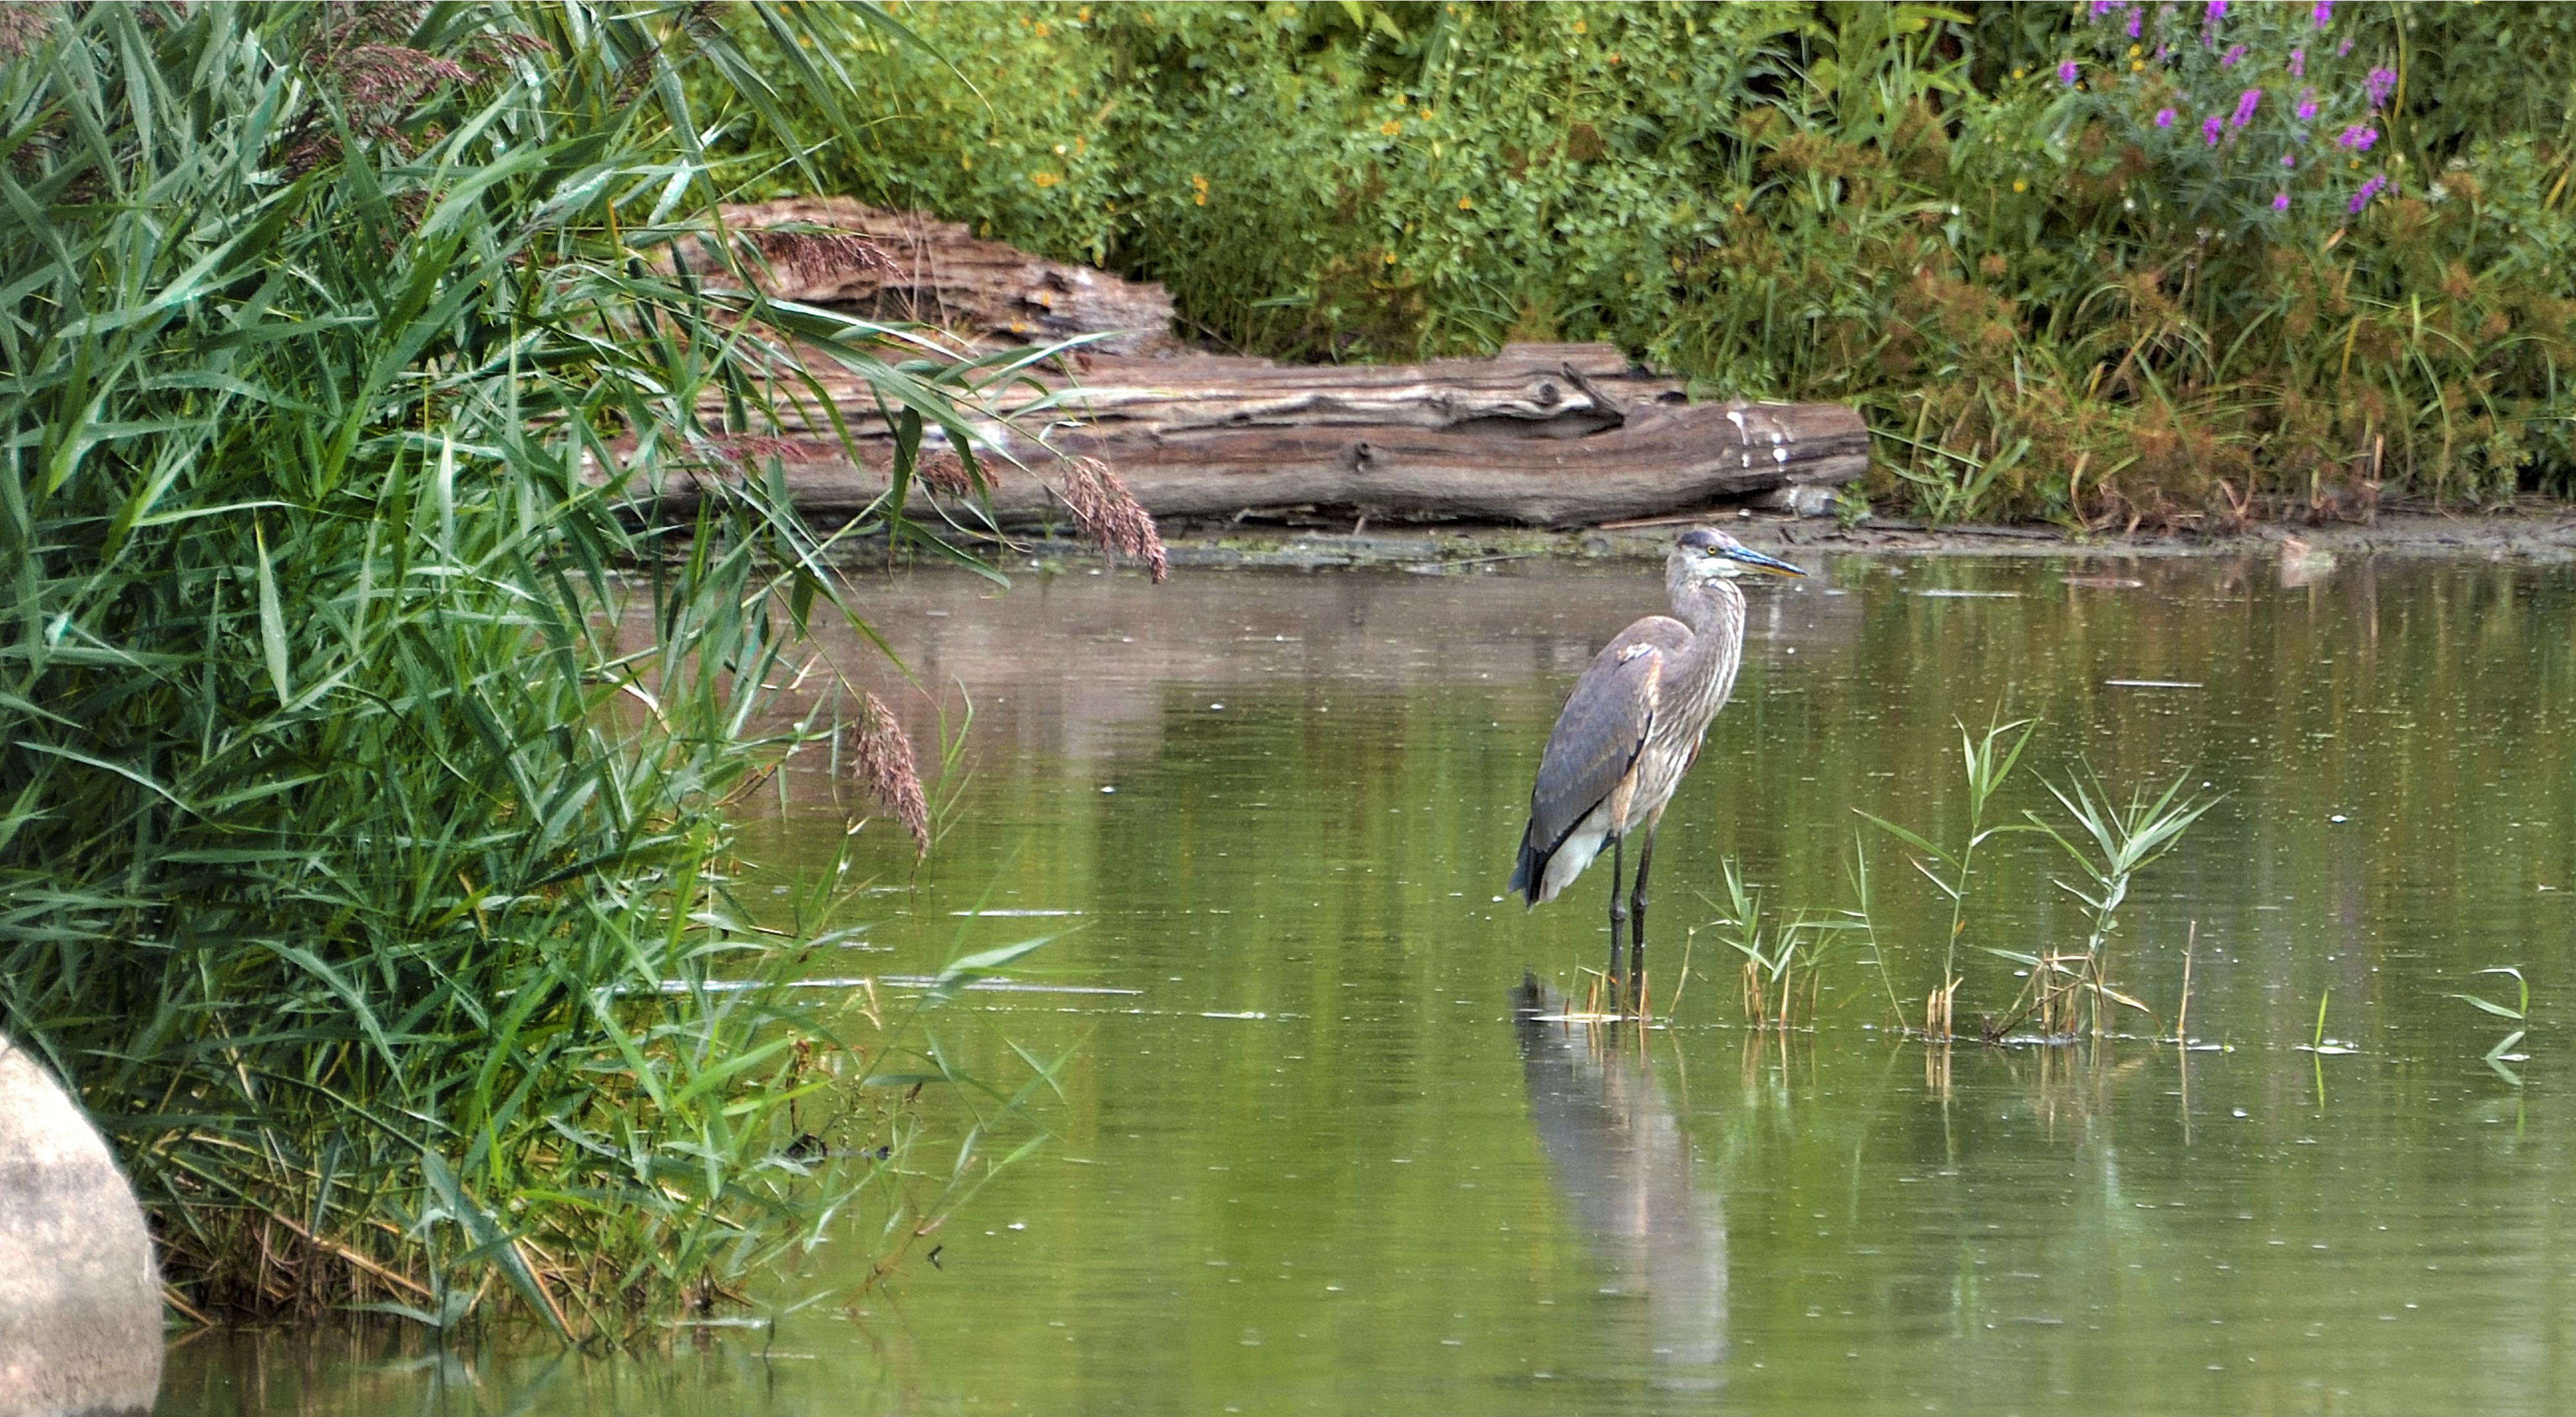 A heron stands in a small pool of water.  